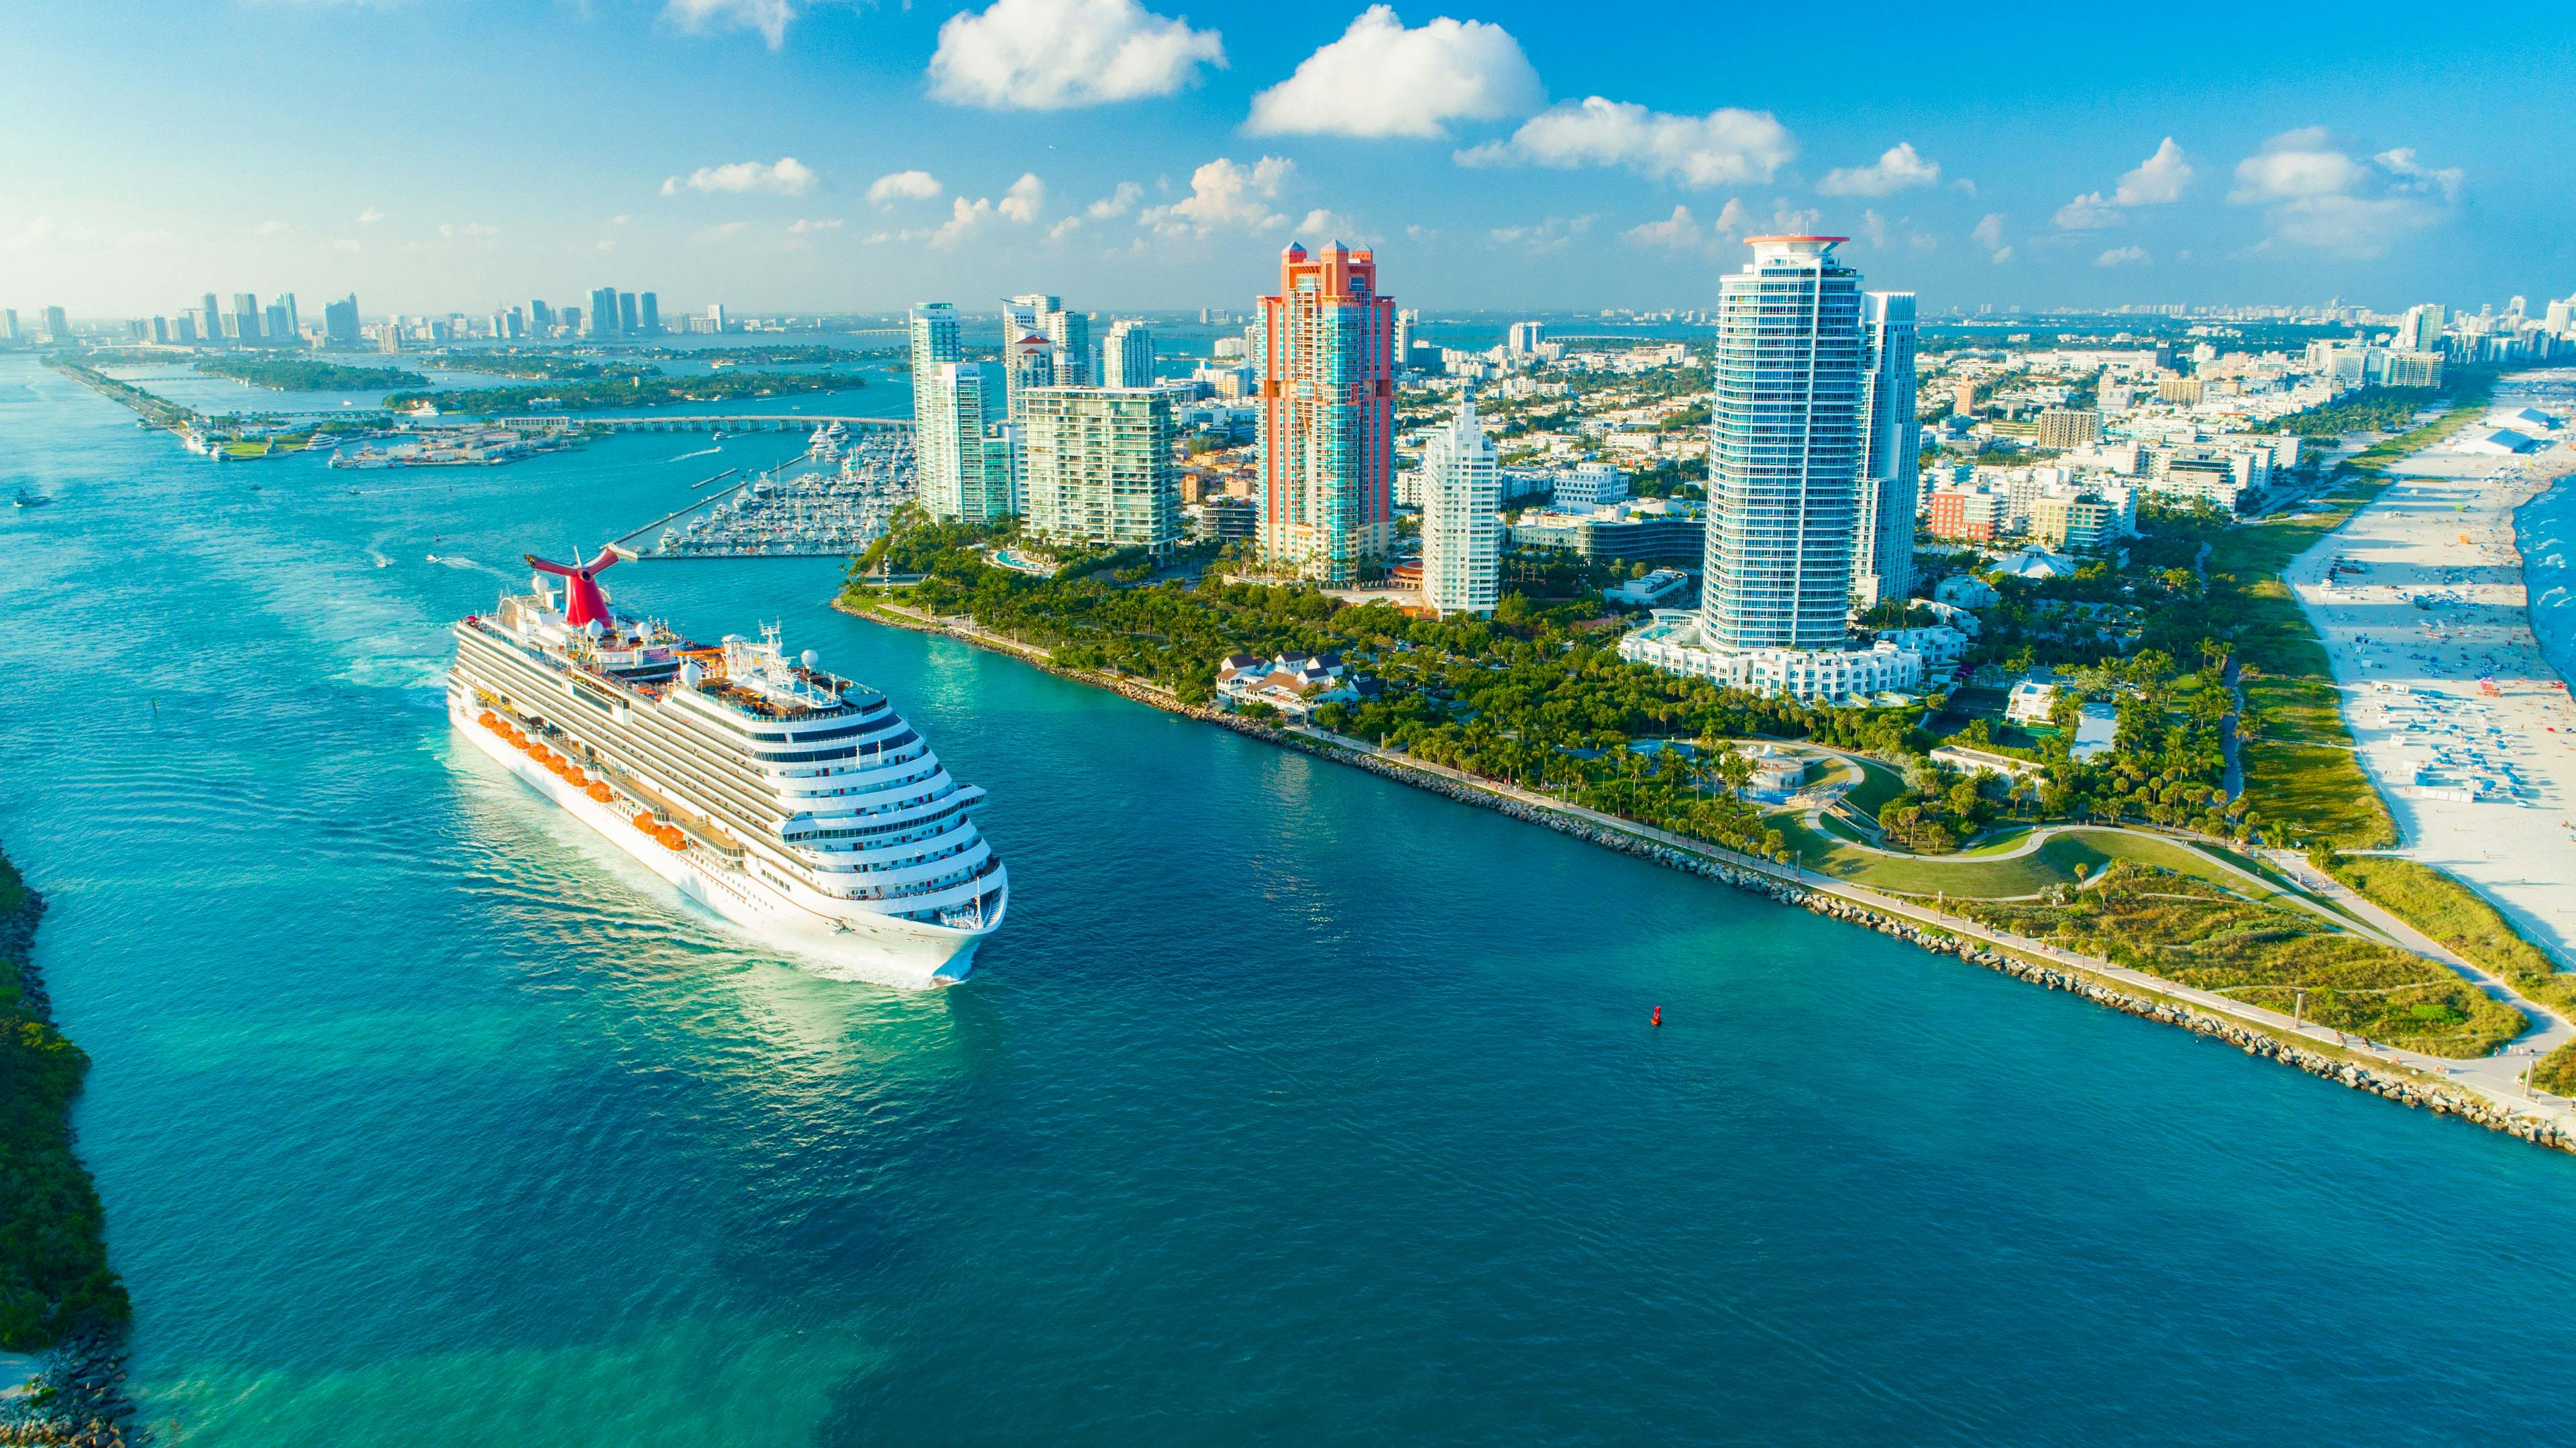 Florida Cruise Ports: Guide to Parking, Hotels, Shuttles & More preview image